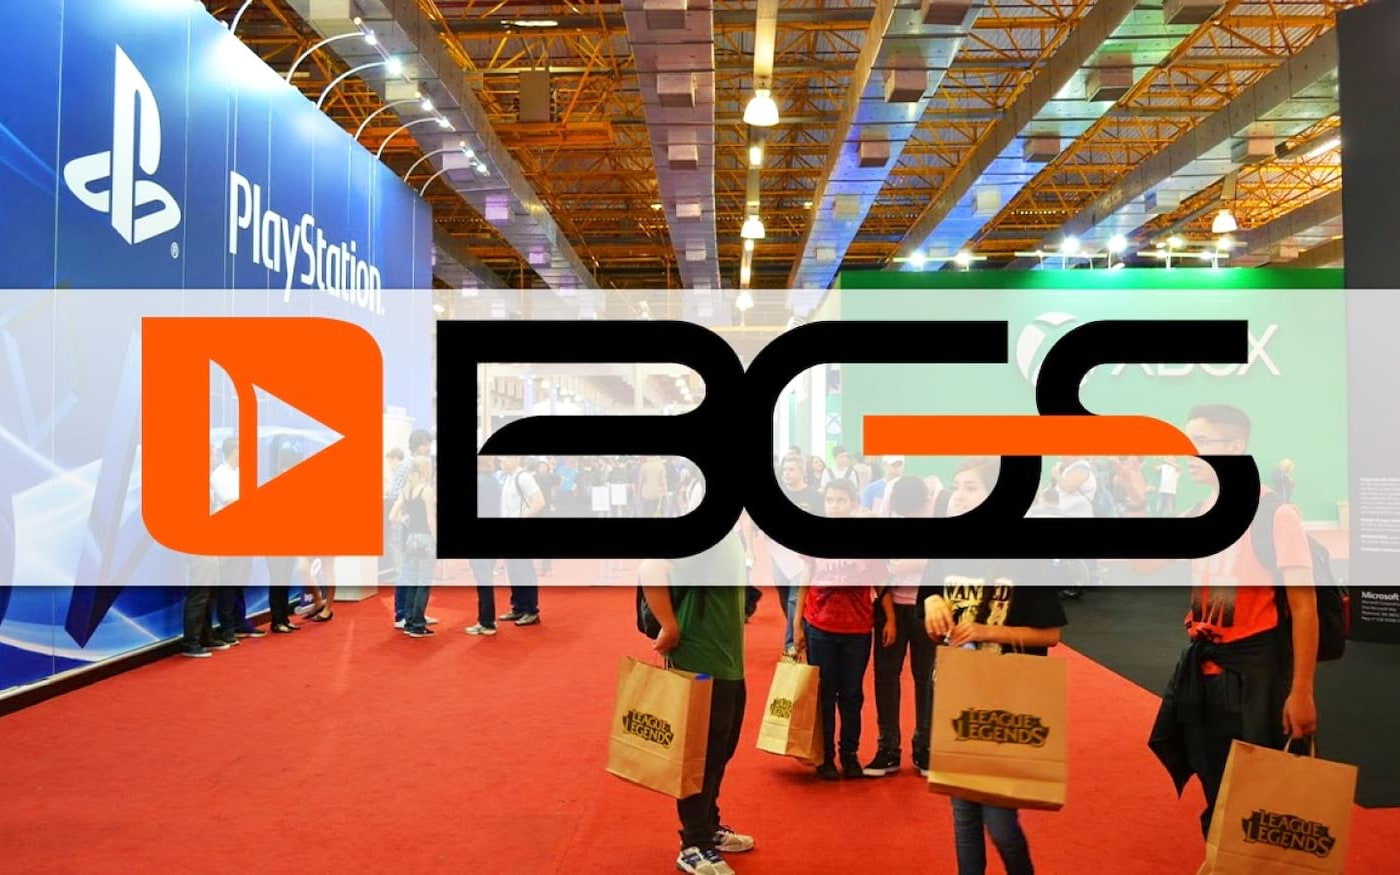 Brasil Game Show (BGS) 2020 starts selling tickets today to Ourocard customers